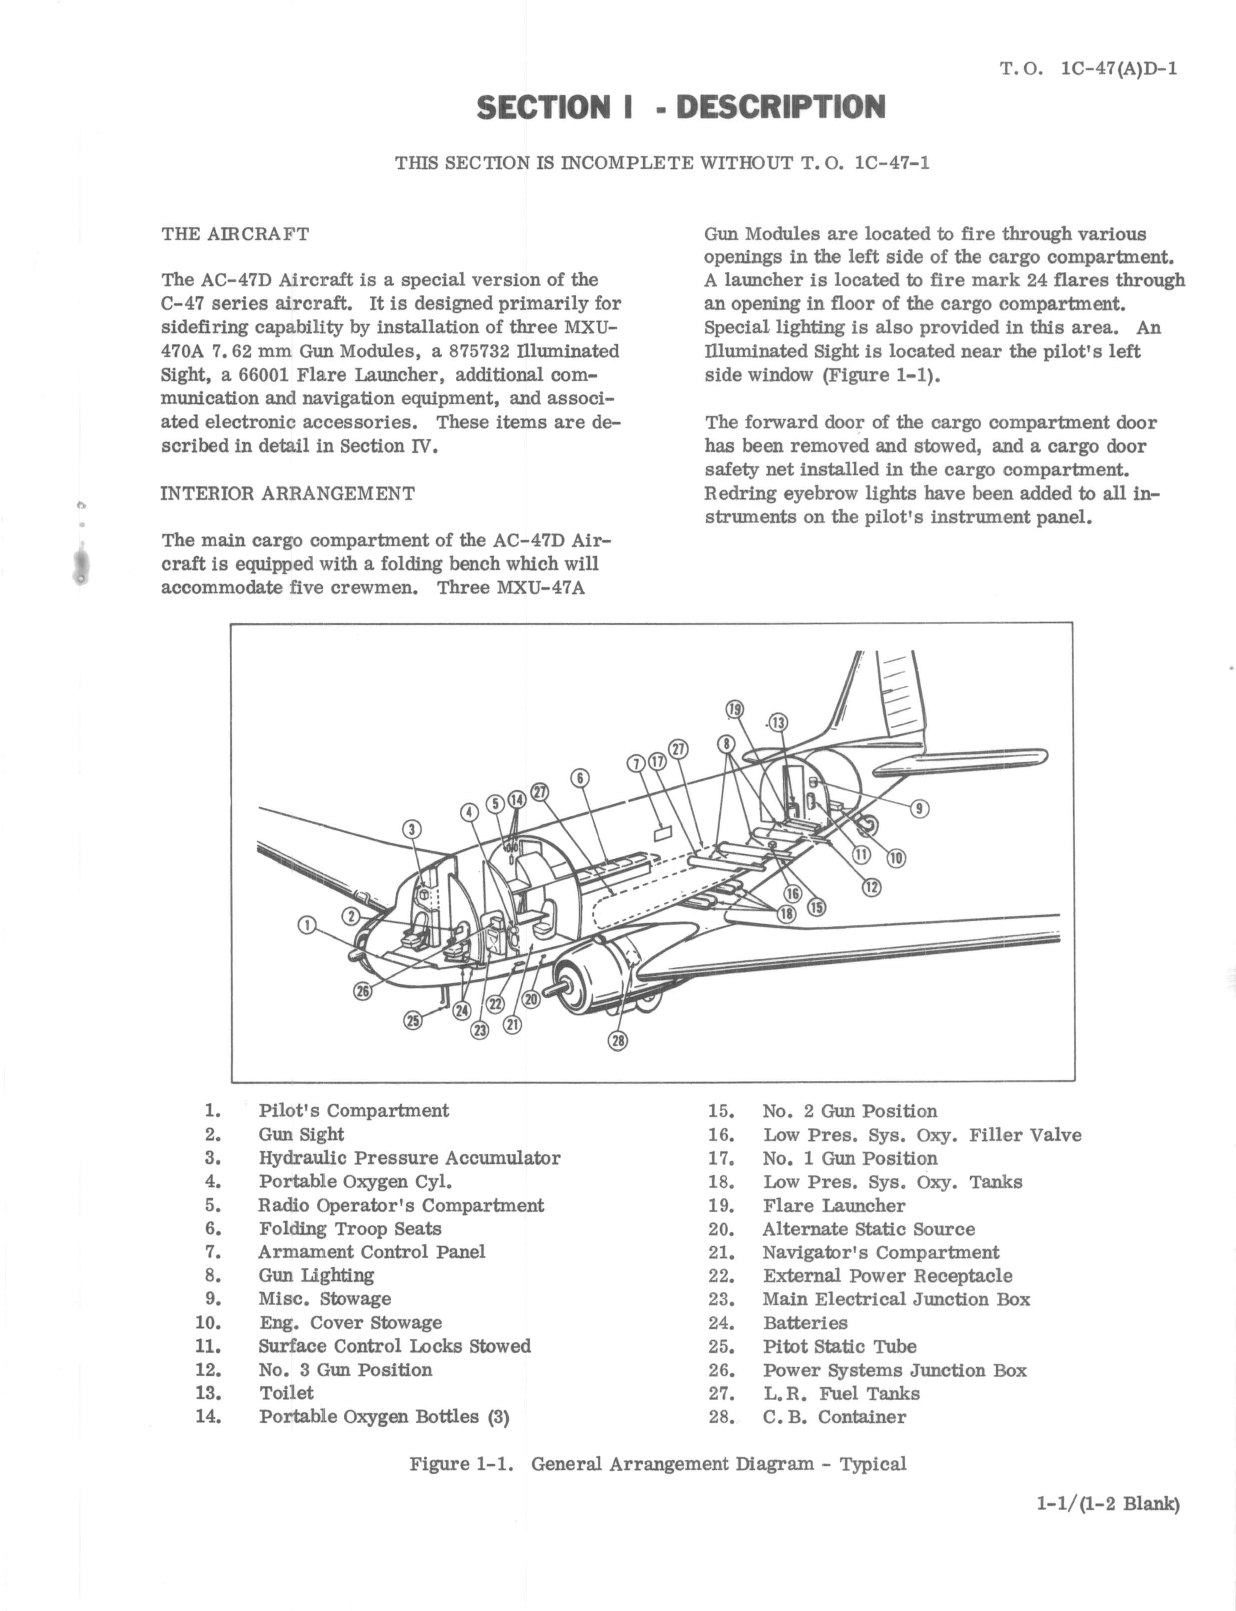 Sample page 7 from AirCorps Library document: Partial Flight Manual for AC-47D Aircraft